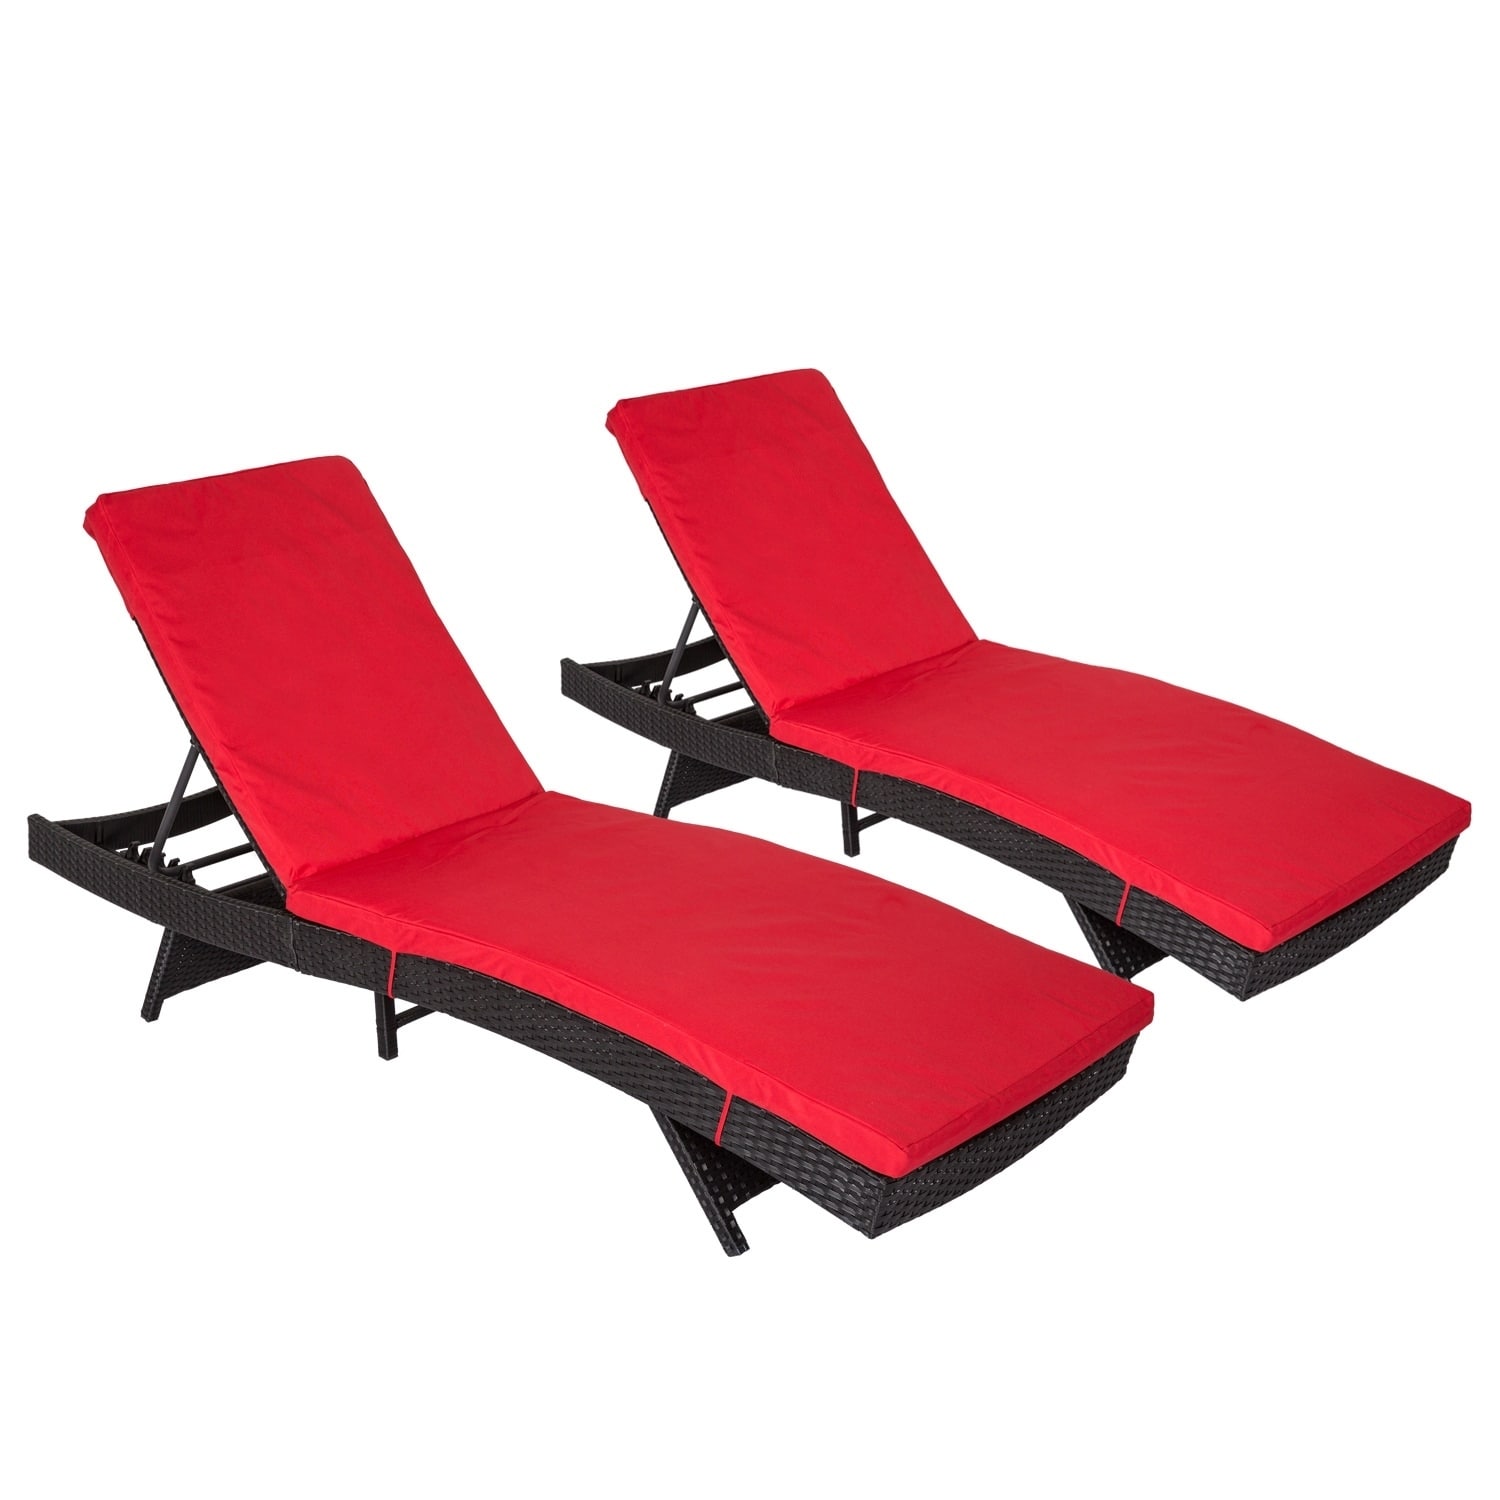 Kinbor 2 Piece Outdoor Chaise Lounge Chair All Weather Pe Ebay